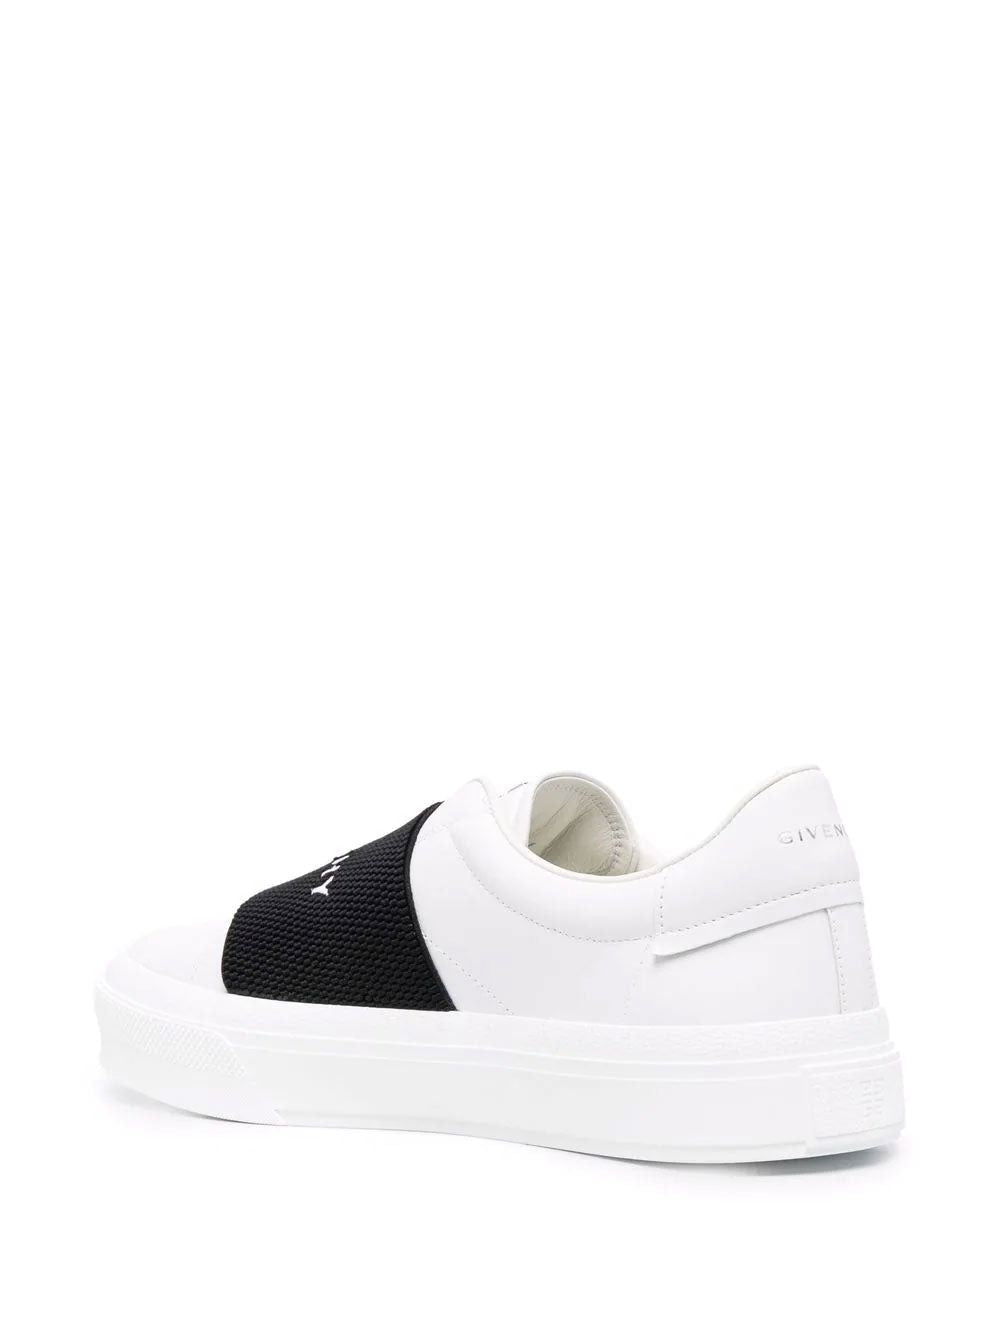 GIVENCHY Men's City Sport Leather Slip-On Sneakers